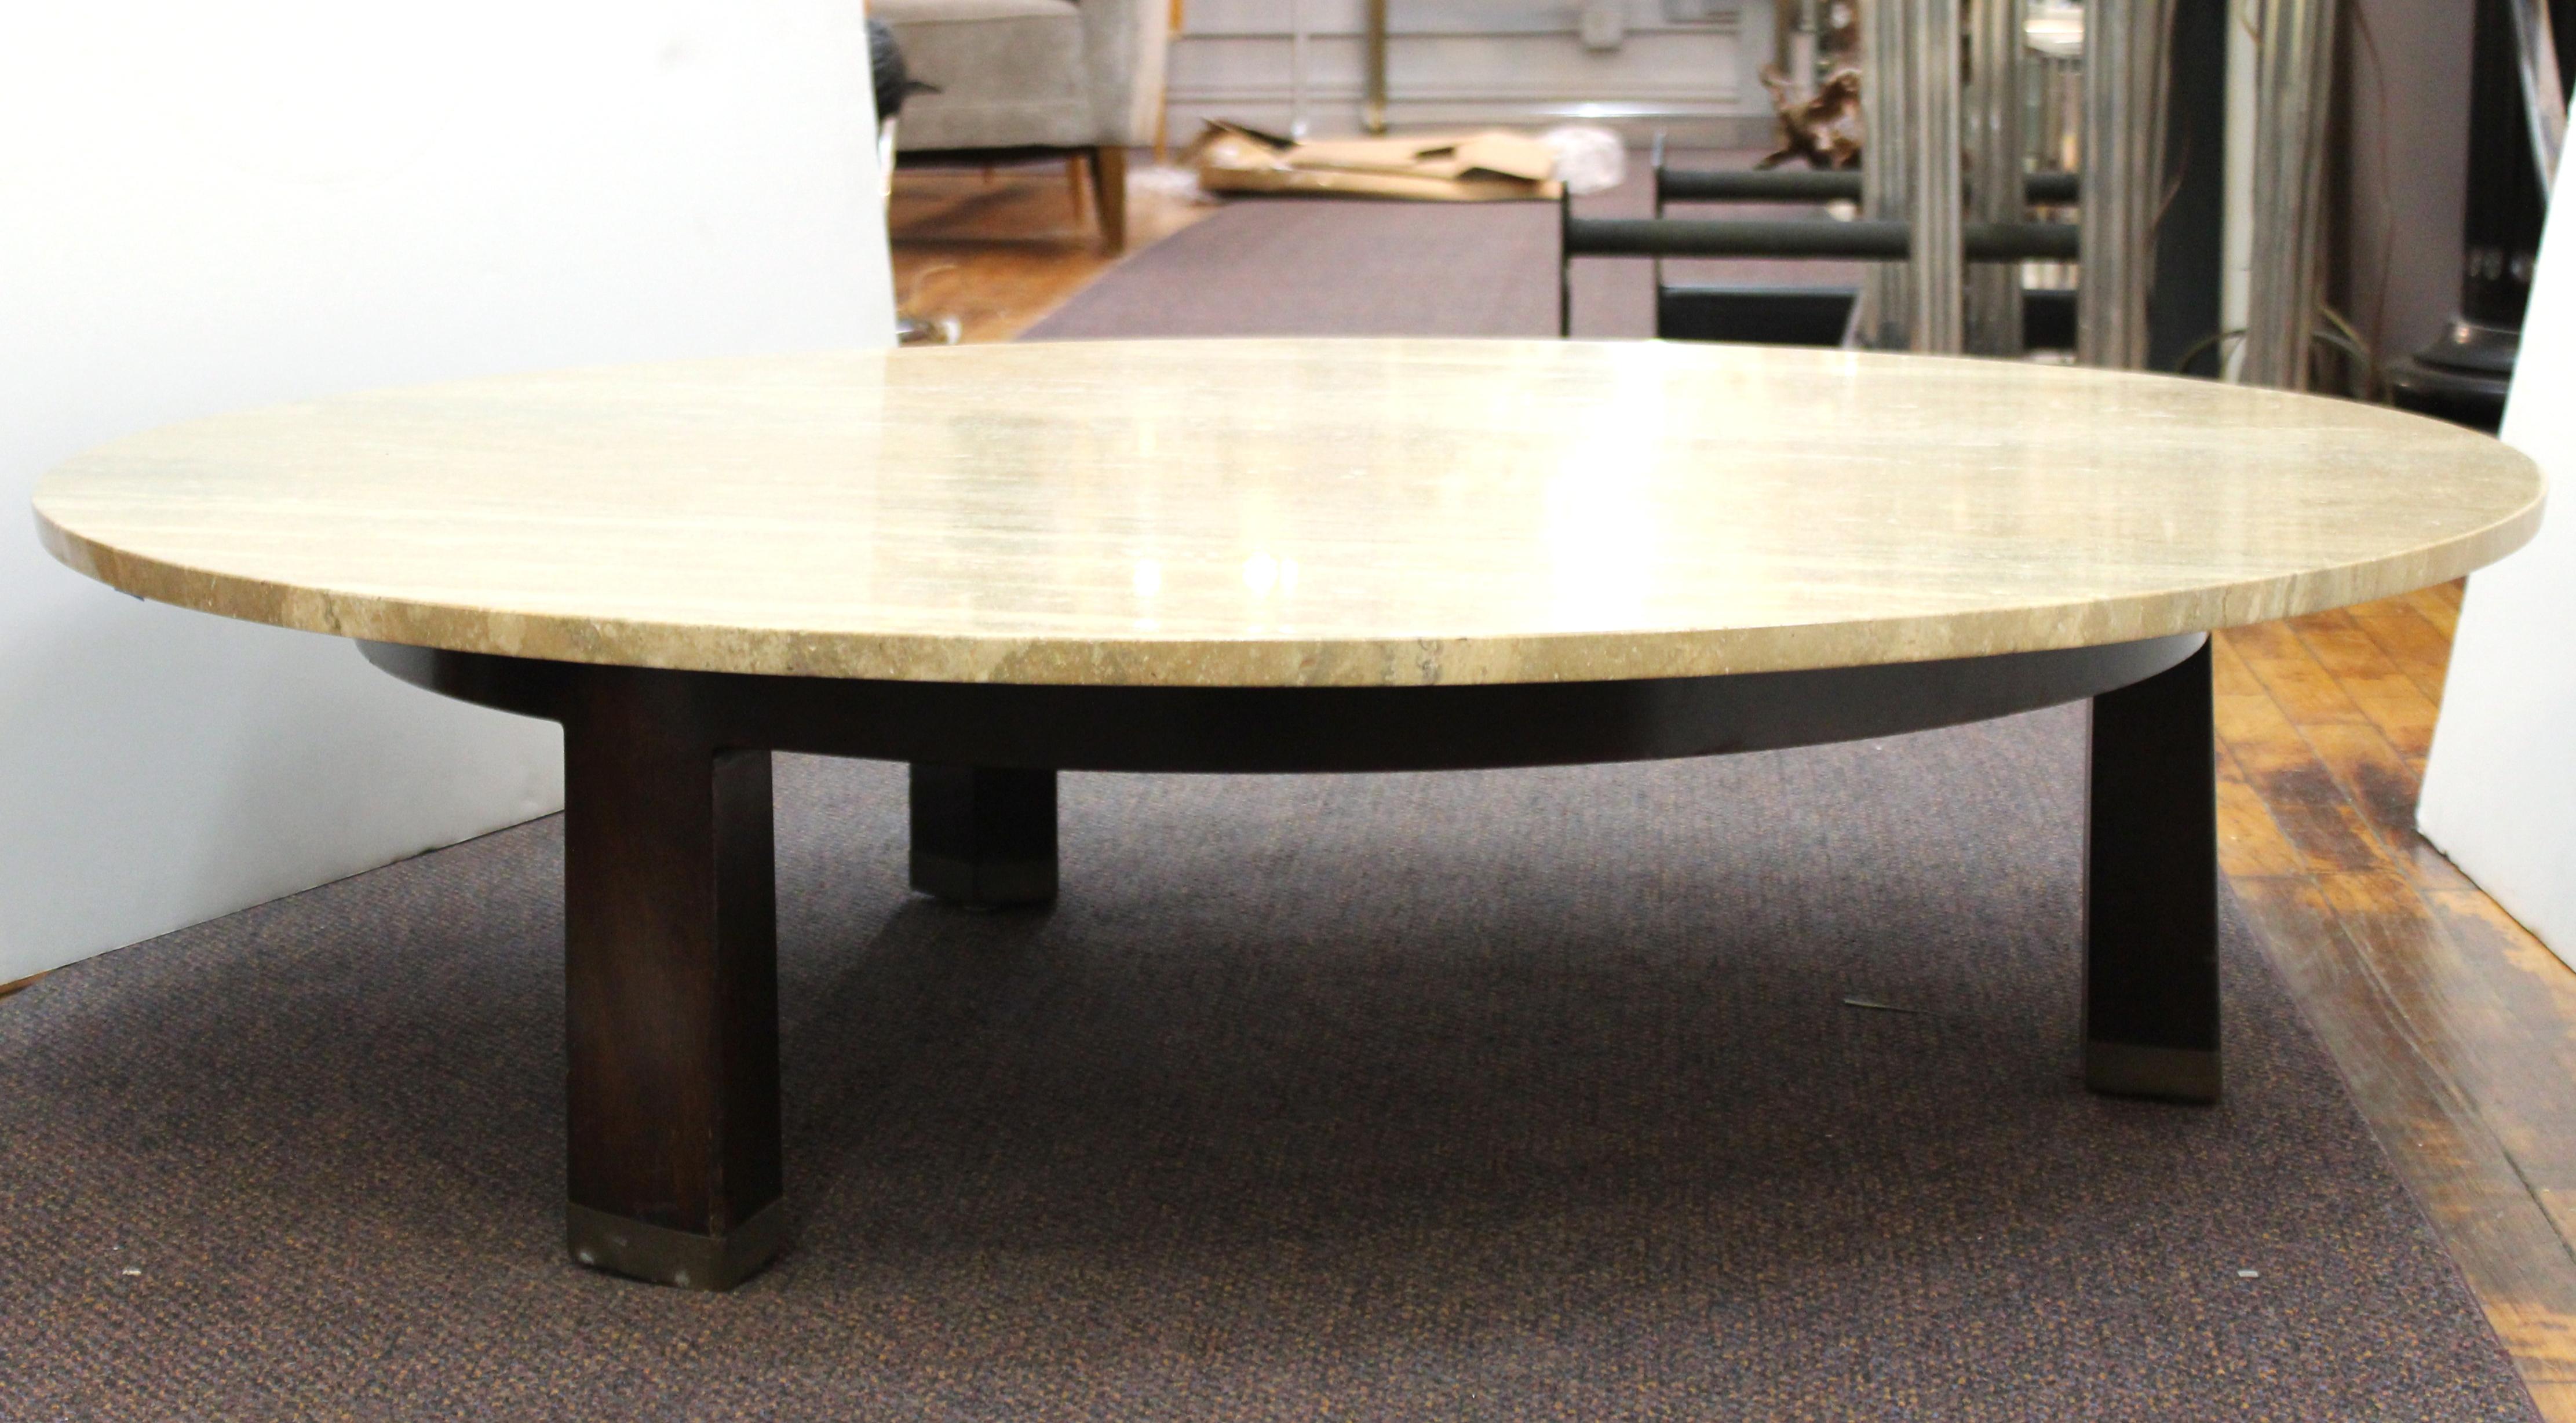 20th Century Edward Wormley for Dunbar Mid-Century Modern Coffee Table with Travertine Top